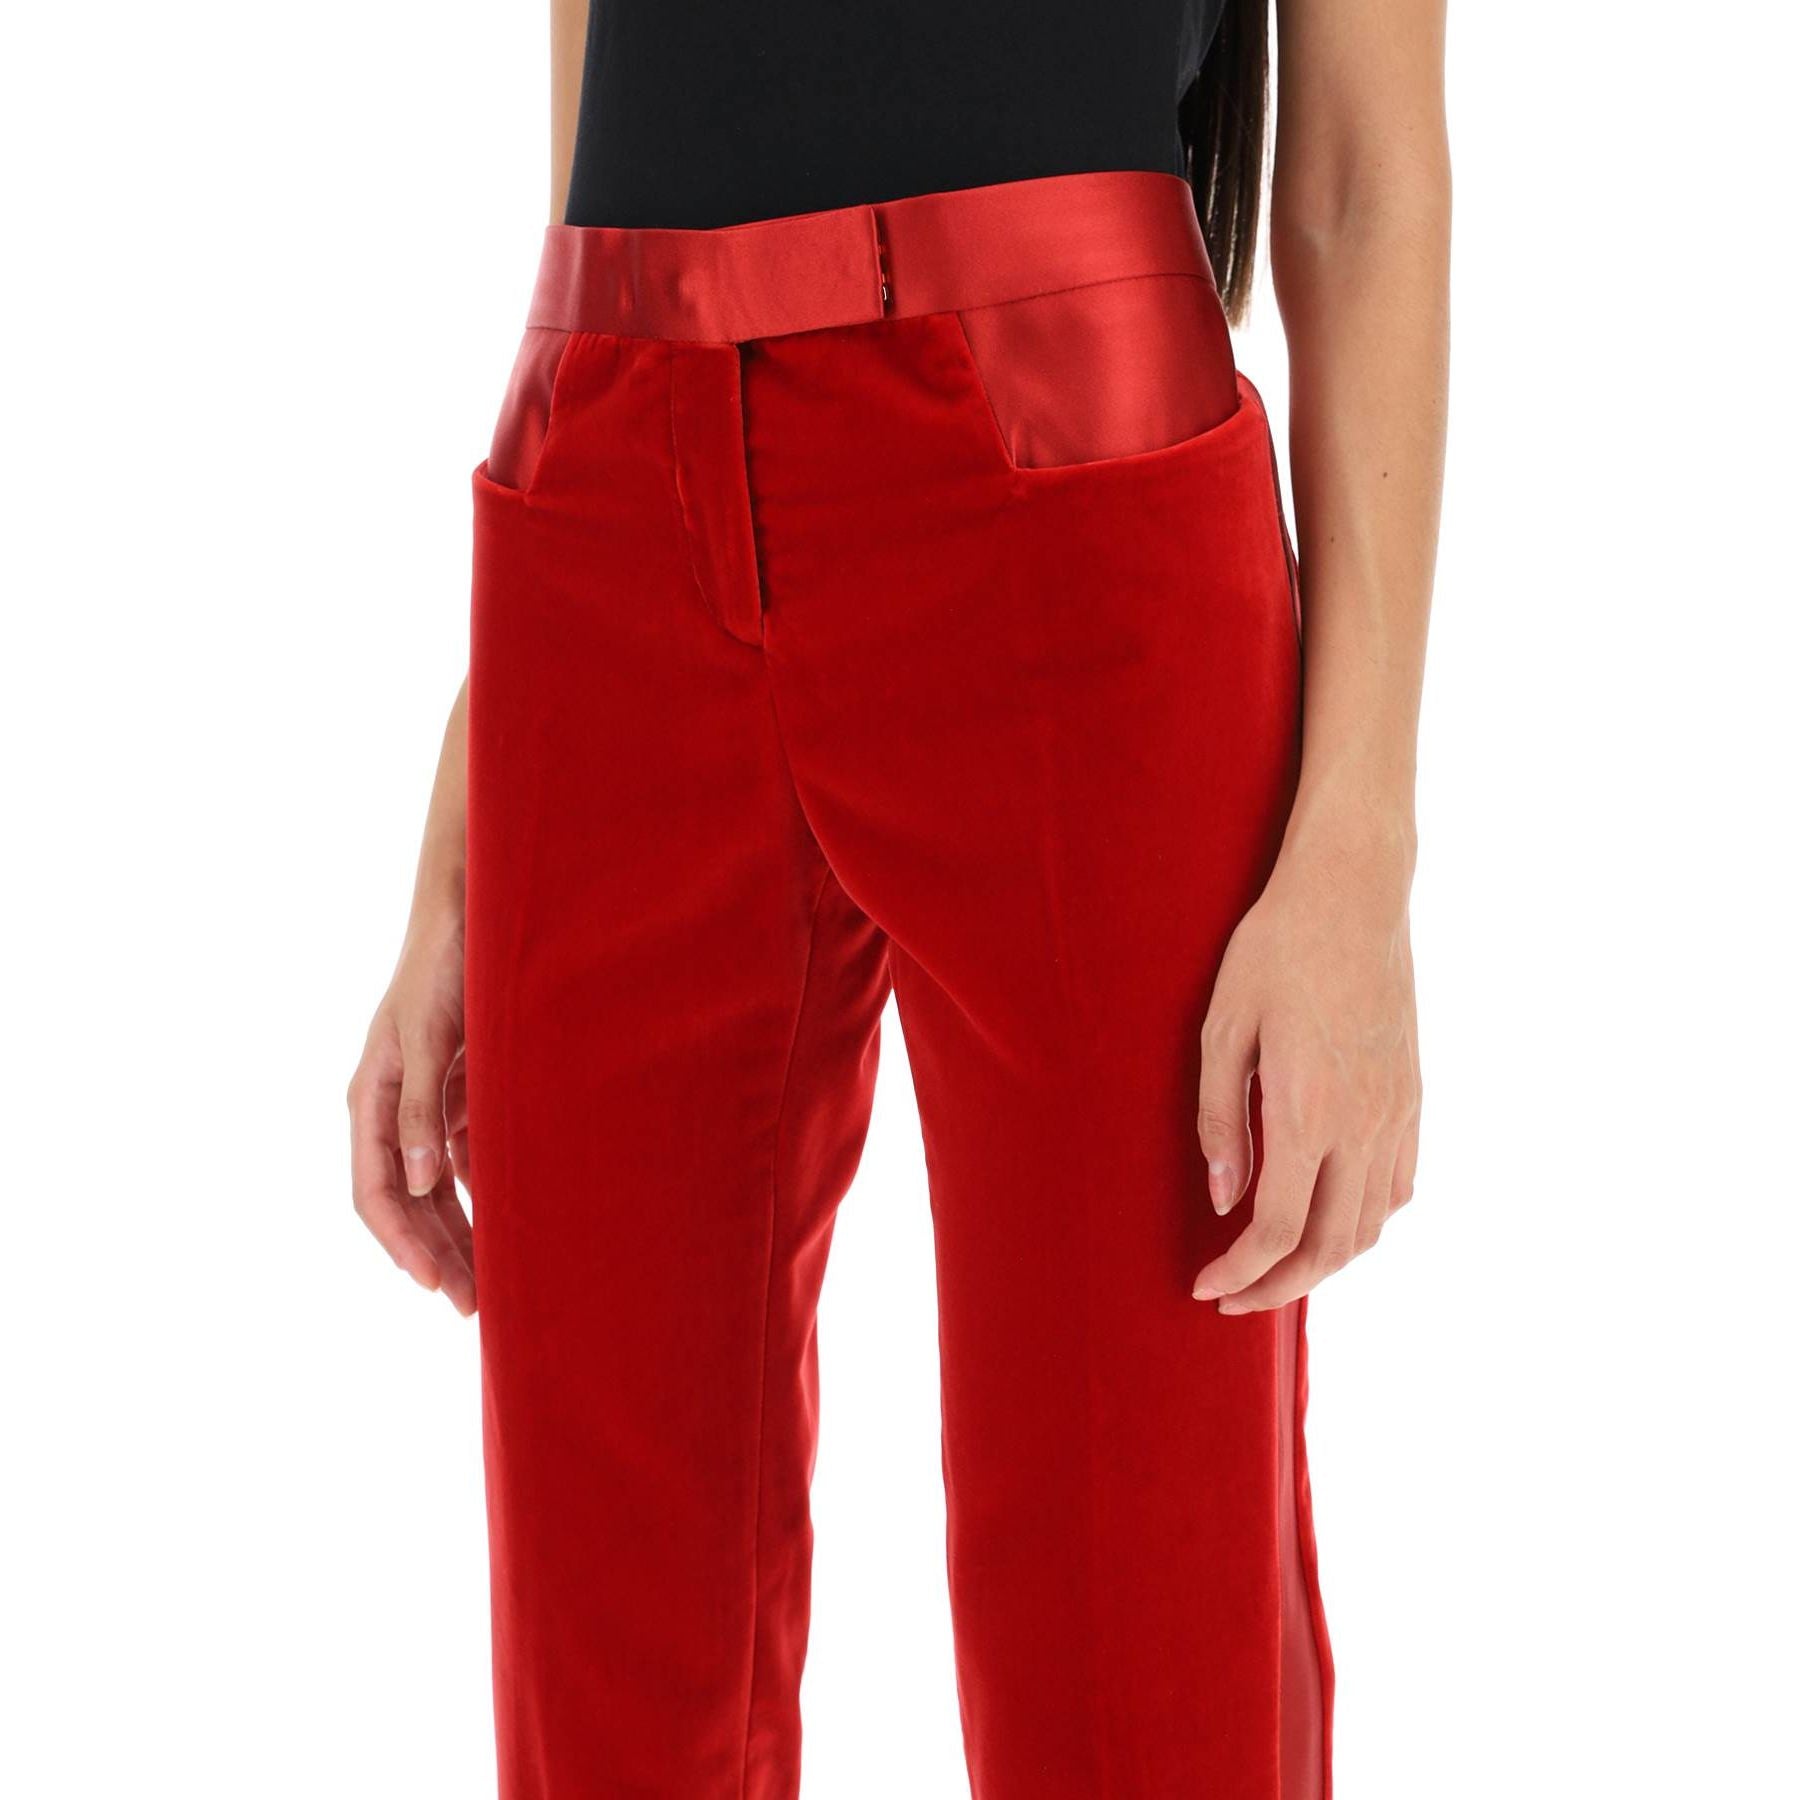 Velvet Pants With Satin Bands